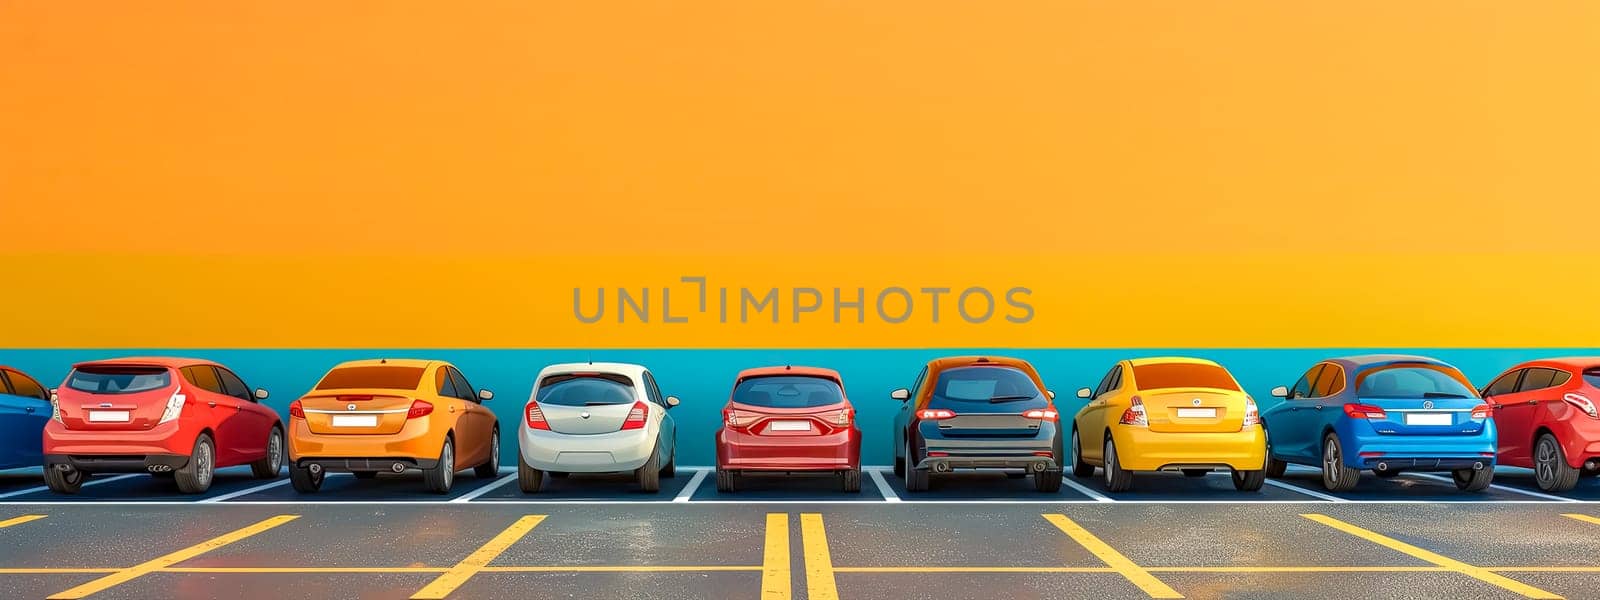 Colorful Cars Parked in a Row Against a Two-Tone Background by Edophoto